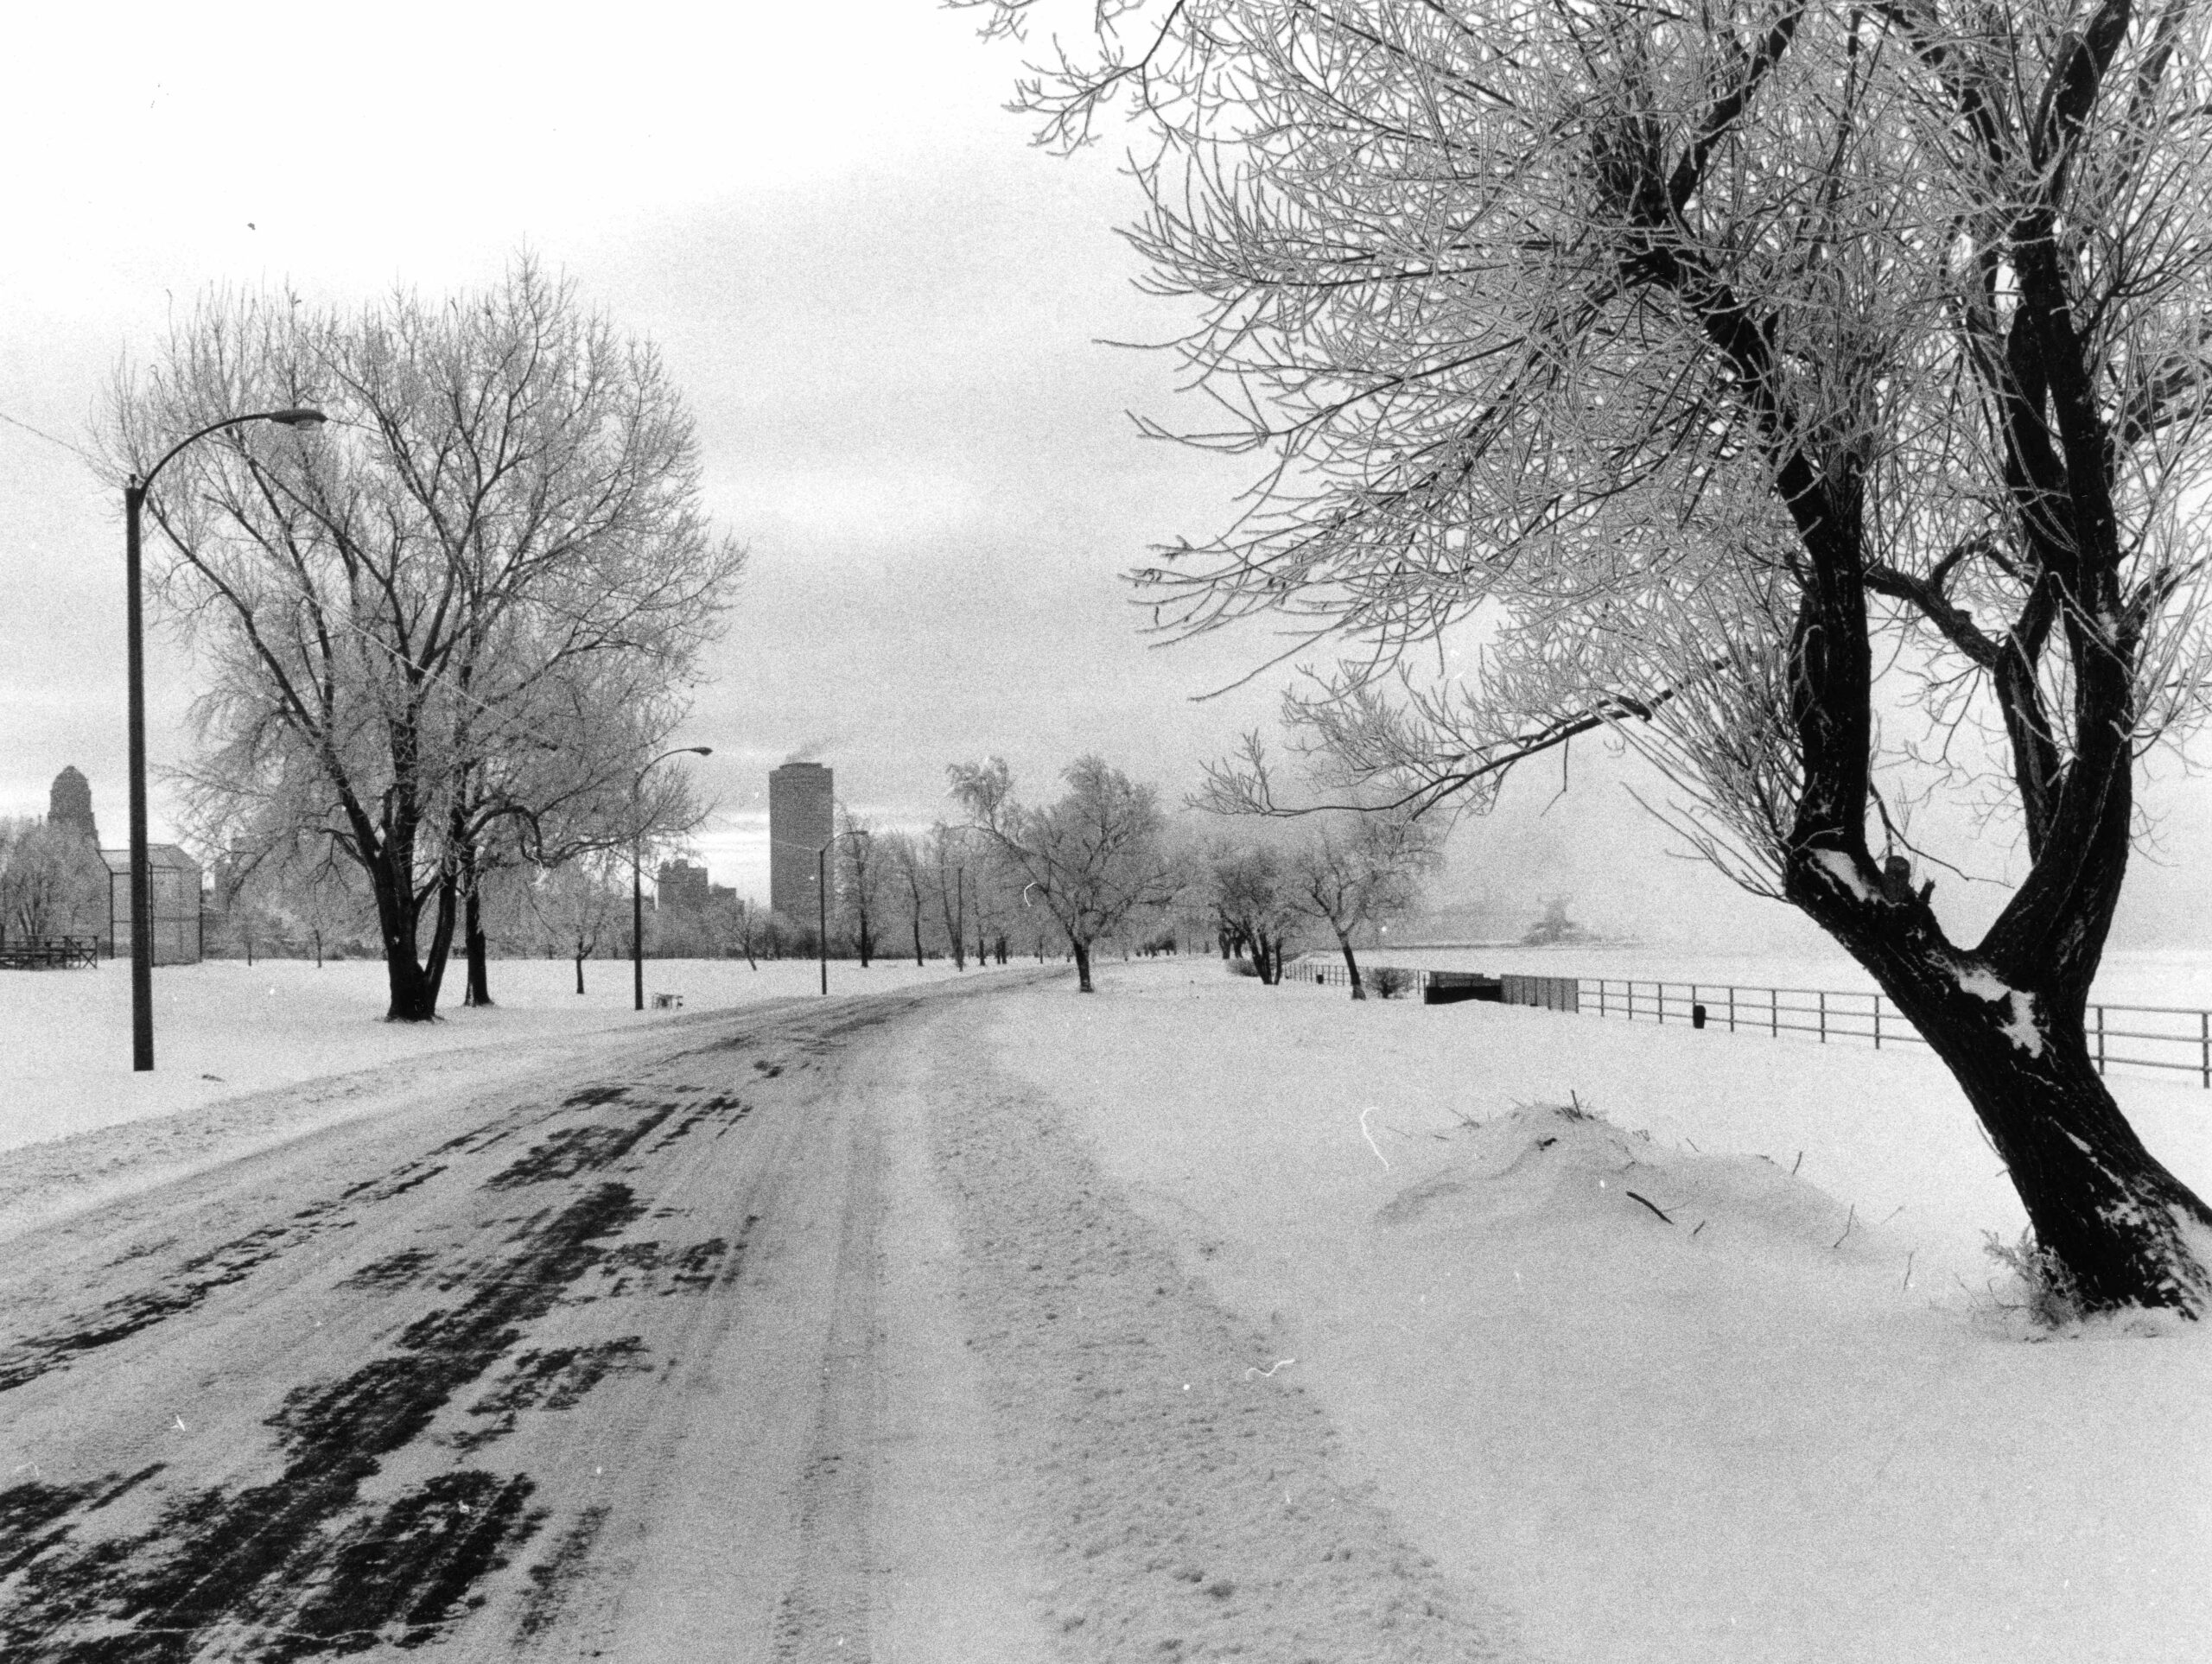 Icy road in LaSalle Park with city skyline in distance, January 19, 1979. Collection of the Buffalo History Museum.